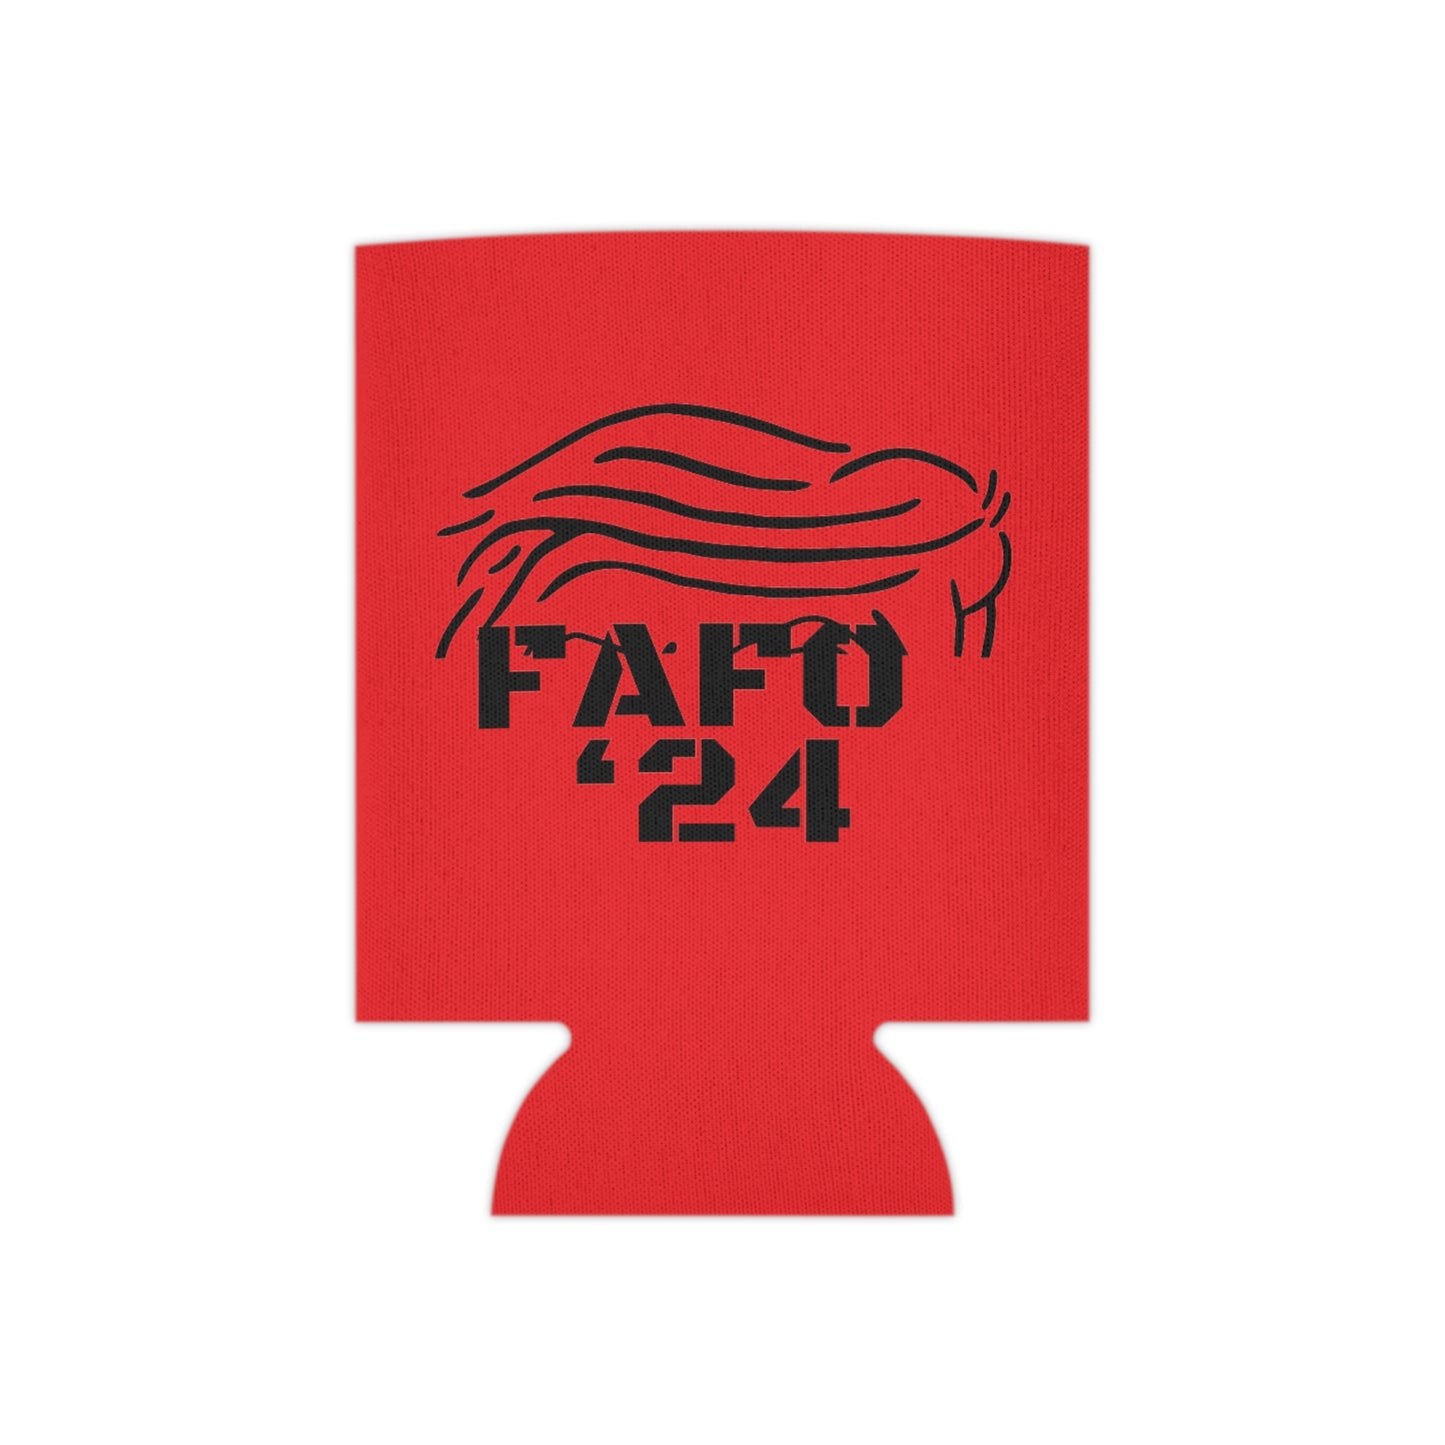 TRUMP FAFO ‘24 Can Cooler